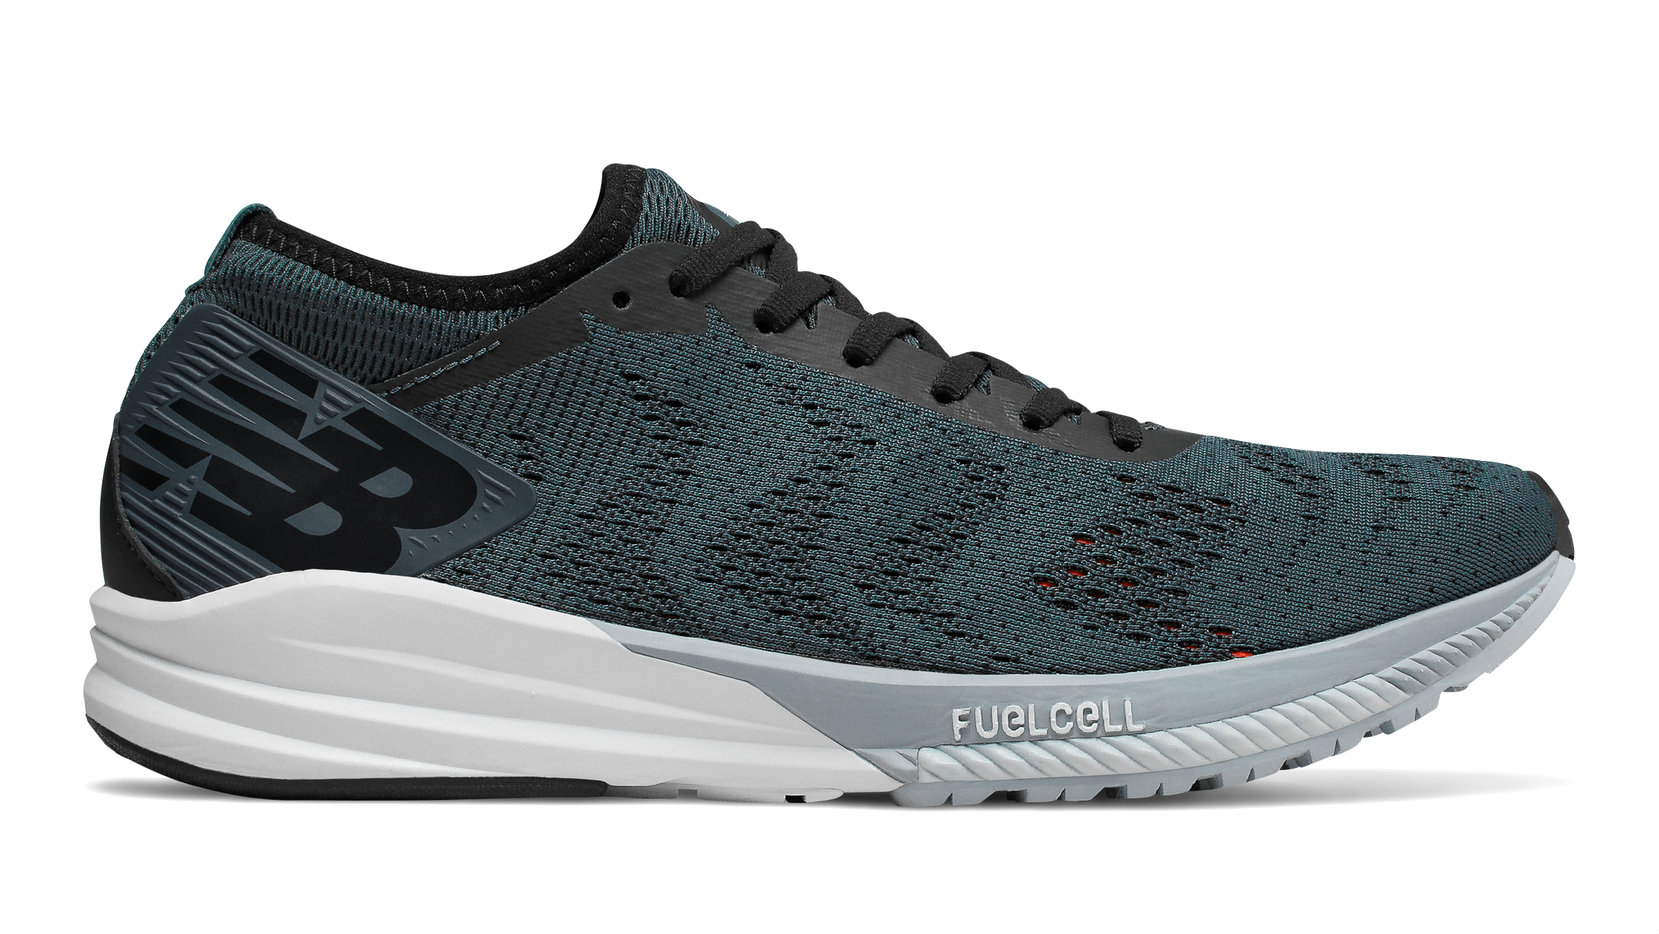 New Balance FuelCell Impulse